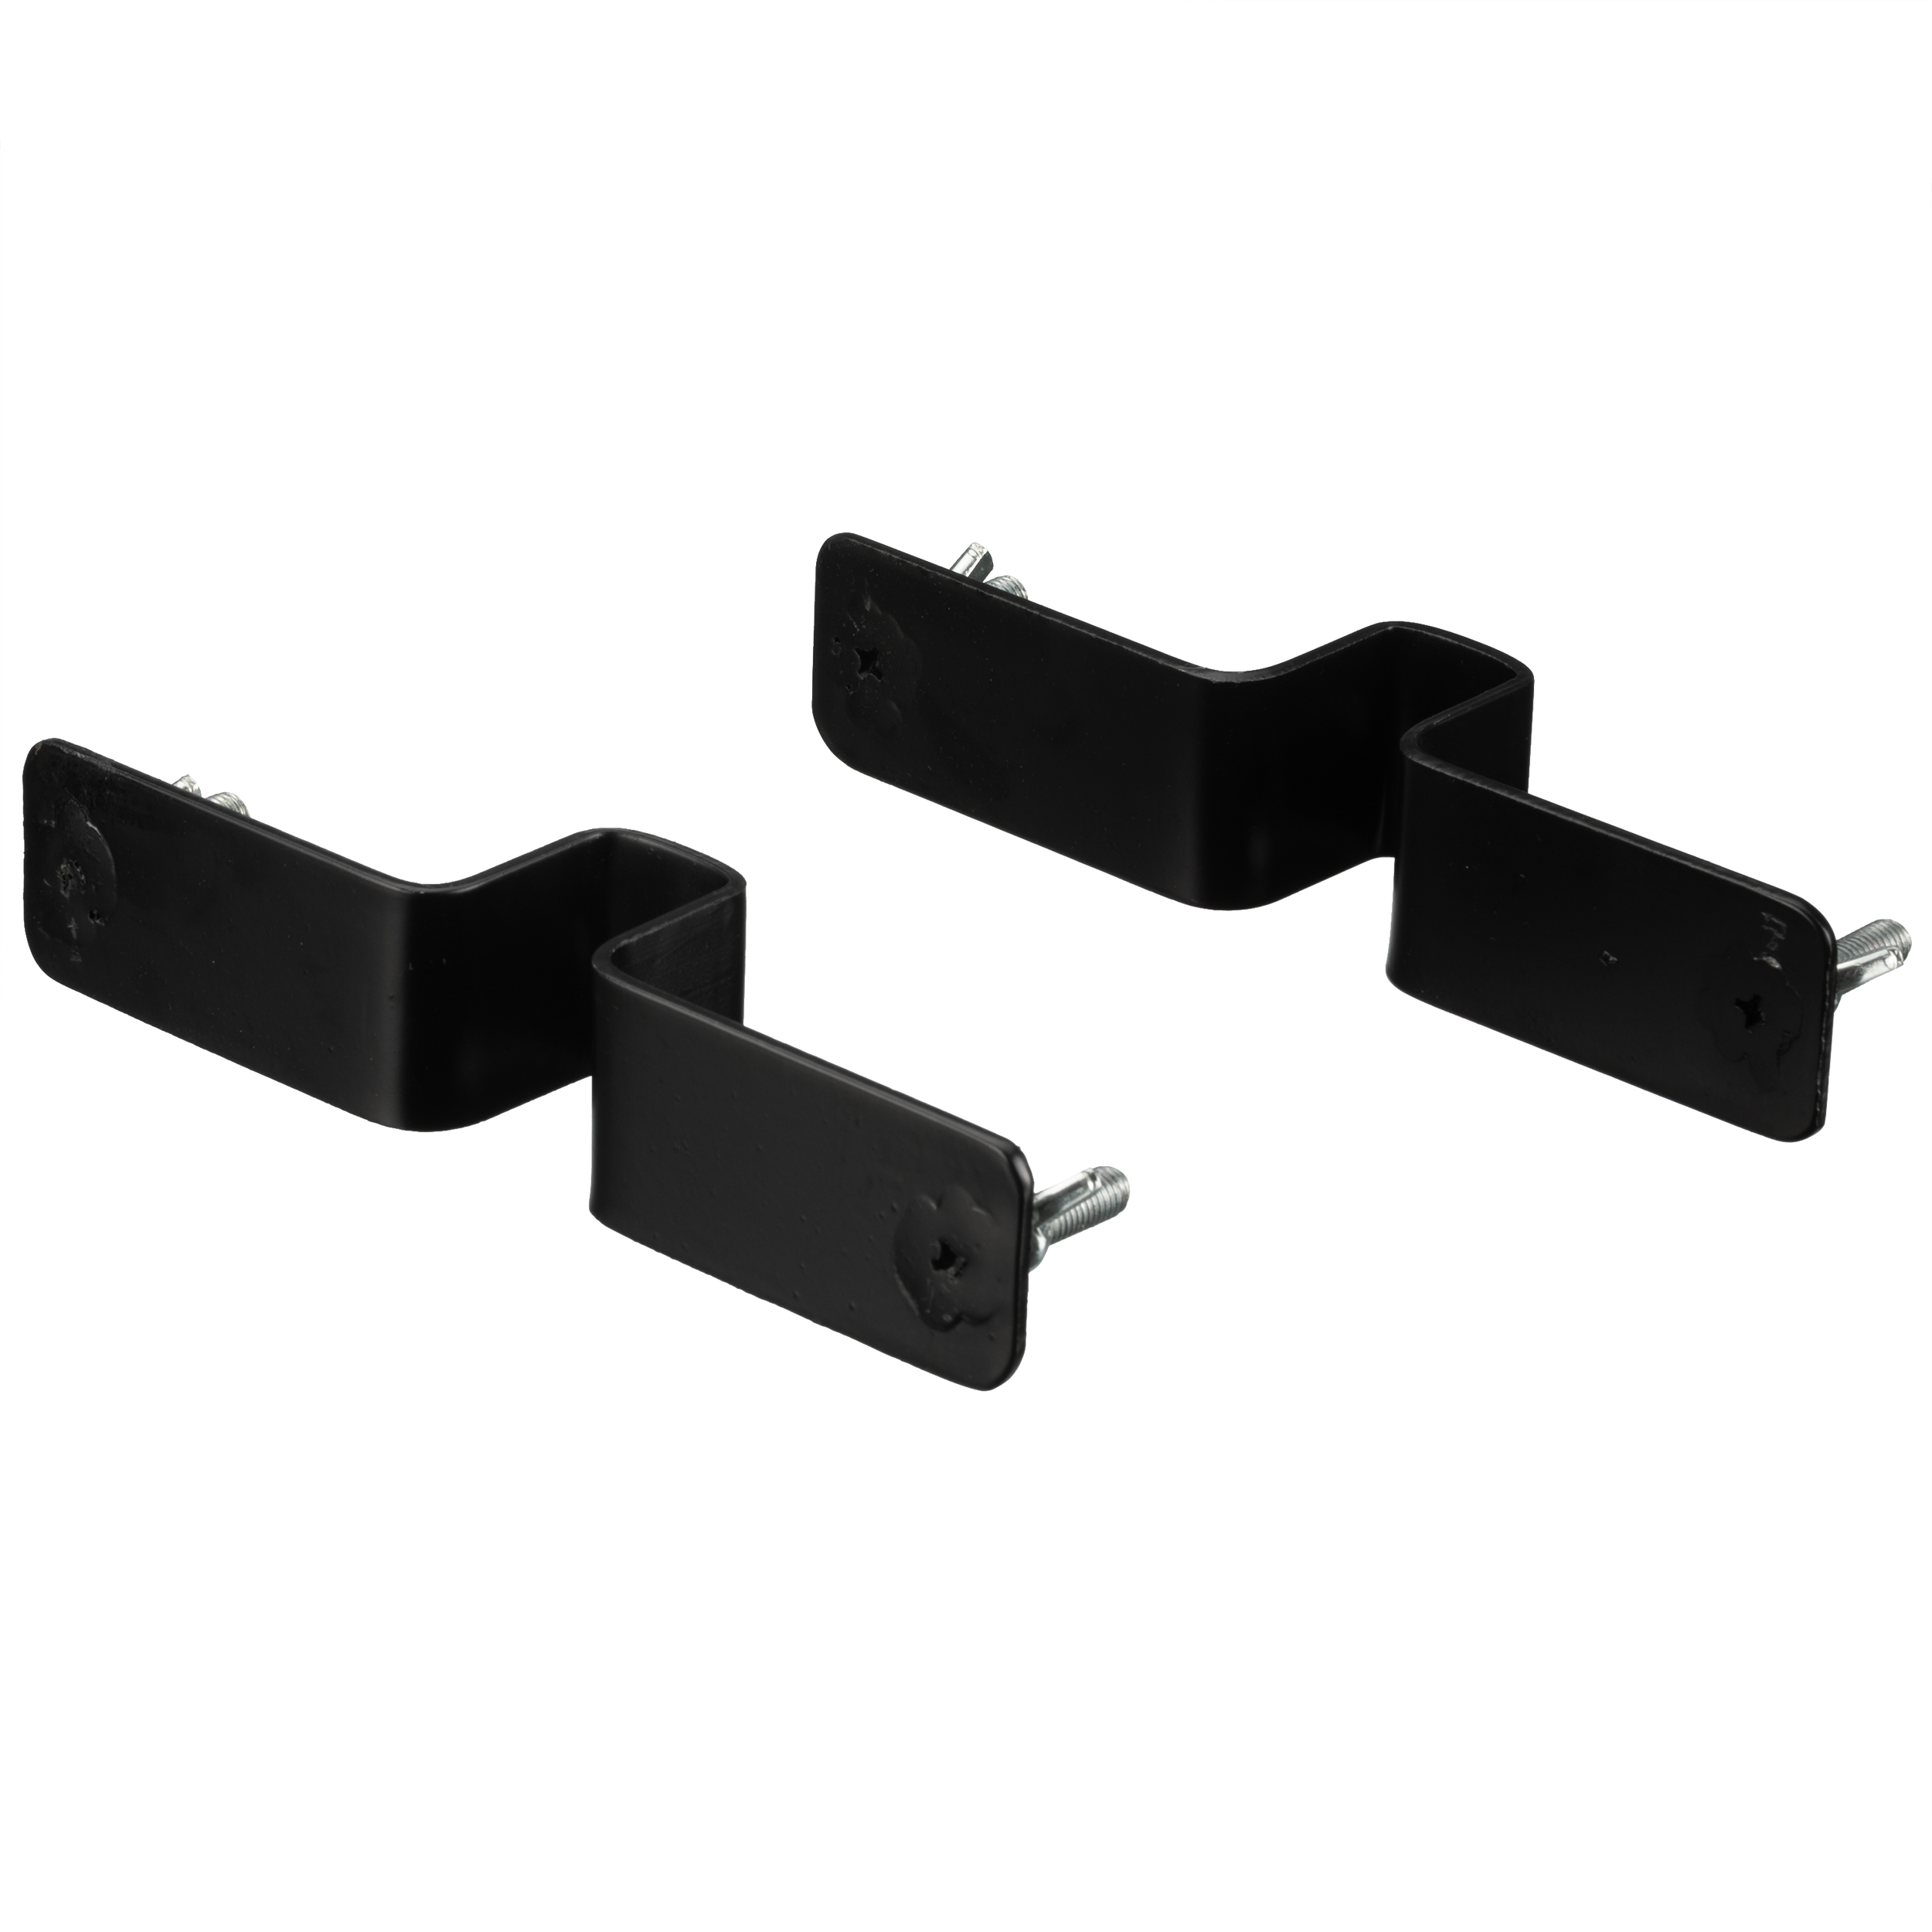 BRESSER BR-D90 PRO-1 Two roll holders for background system